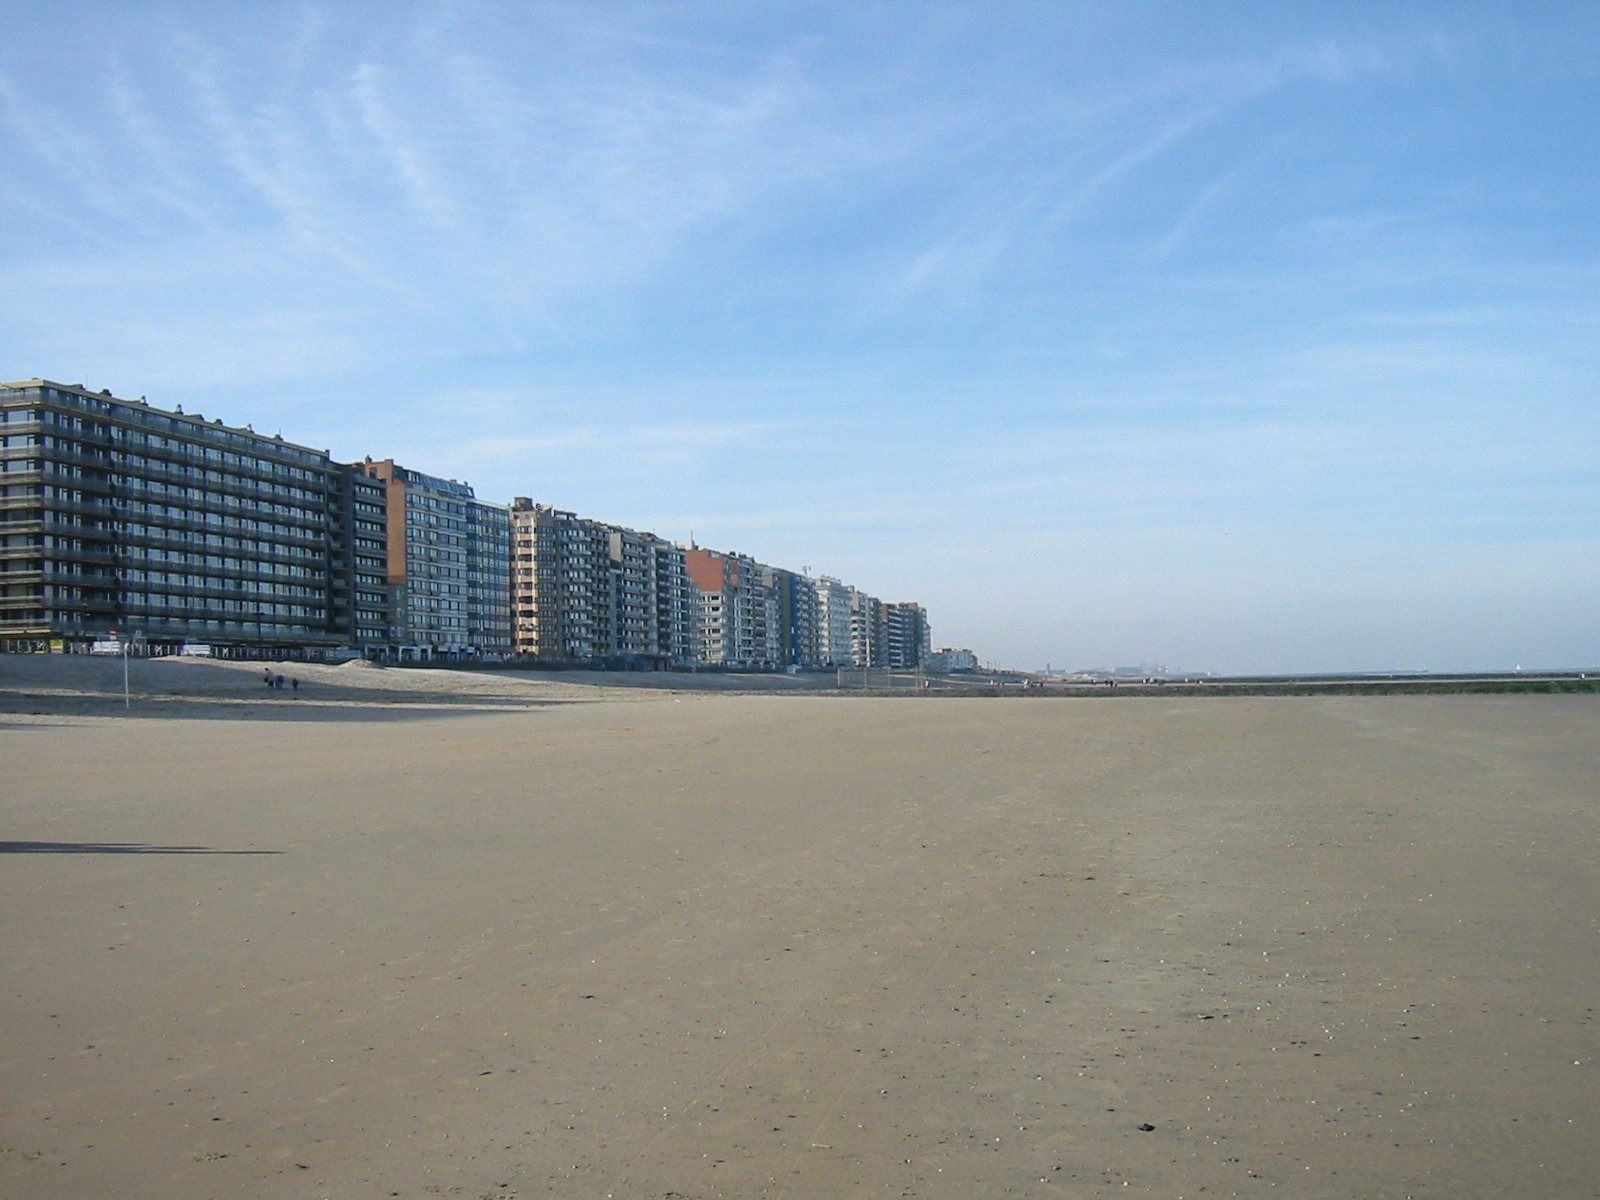 the tall buildings are on the beach near the water